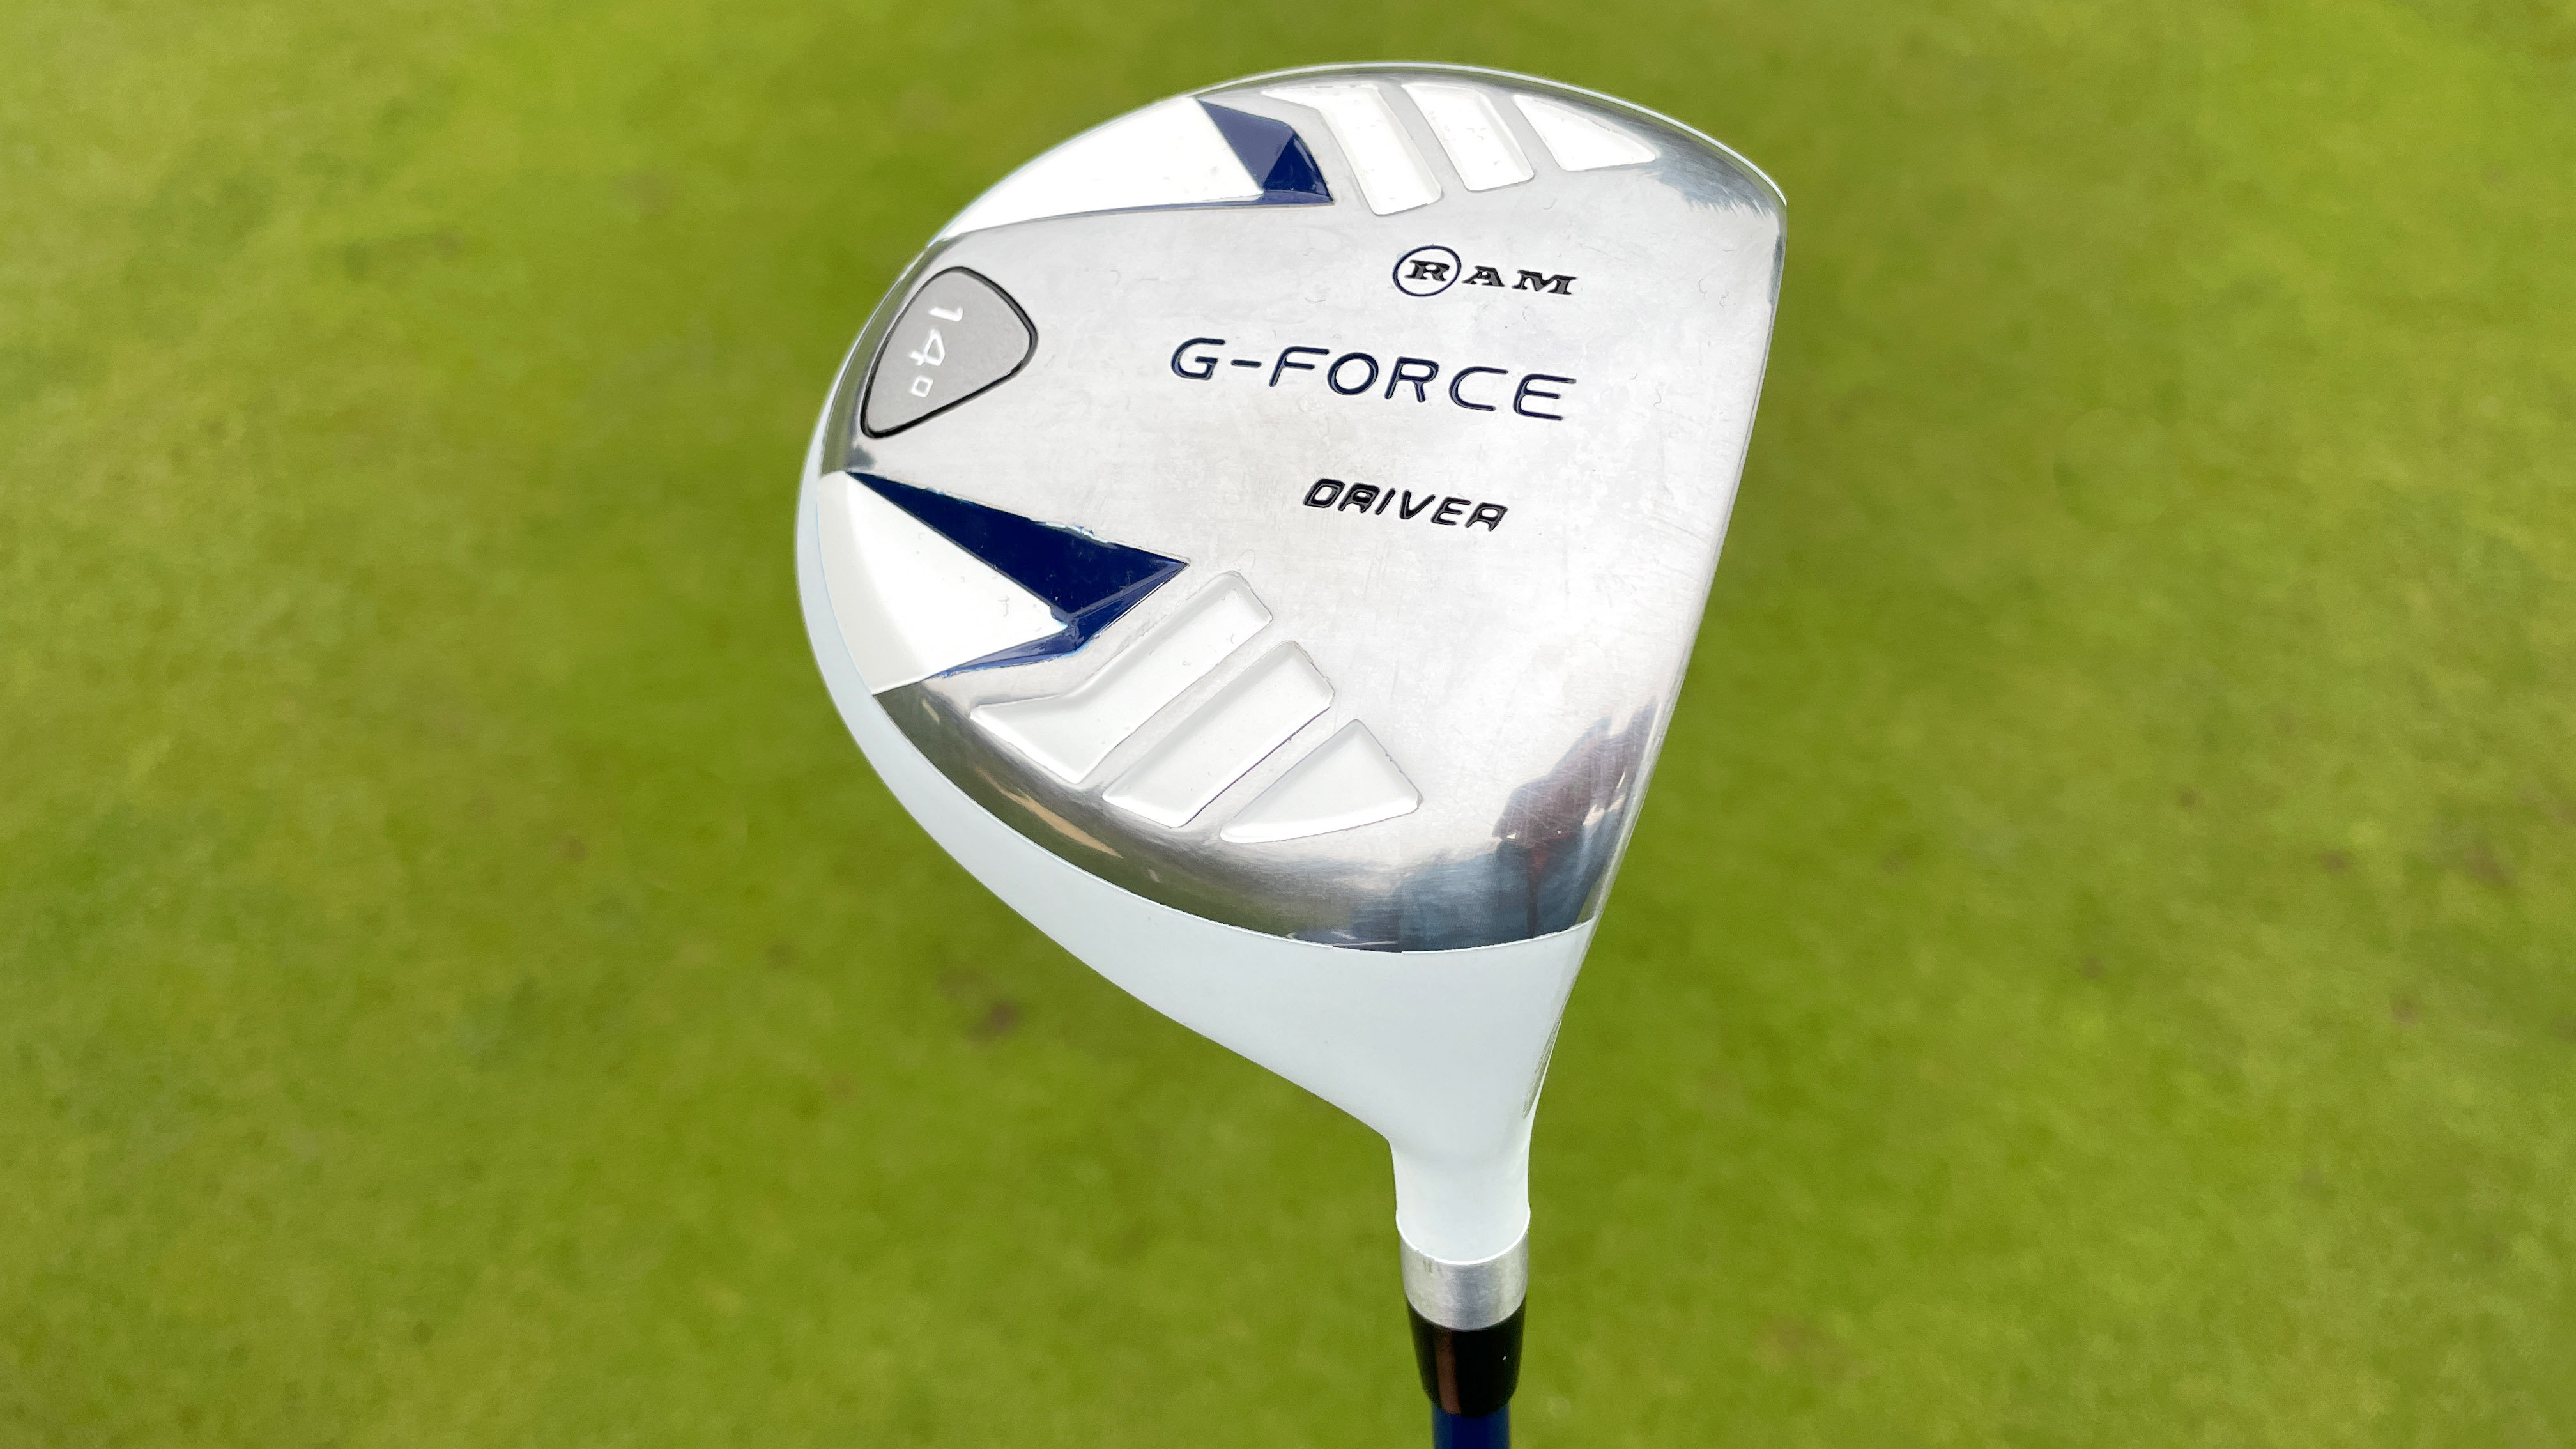 Ram Junior G-Force Golf Club Set 4-6 Years Review